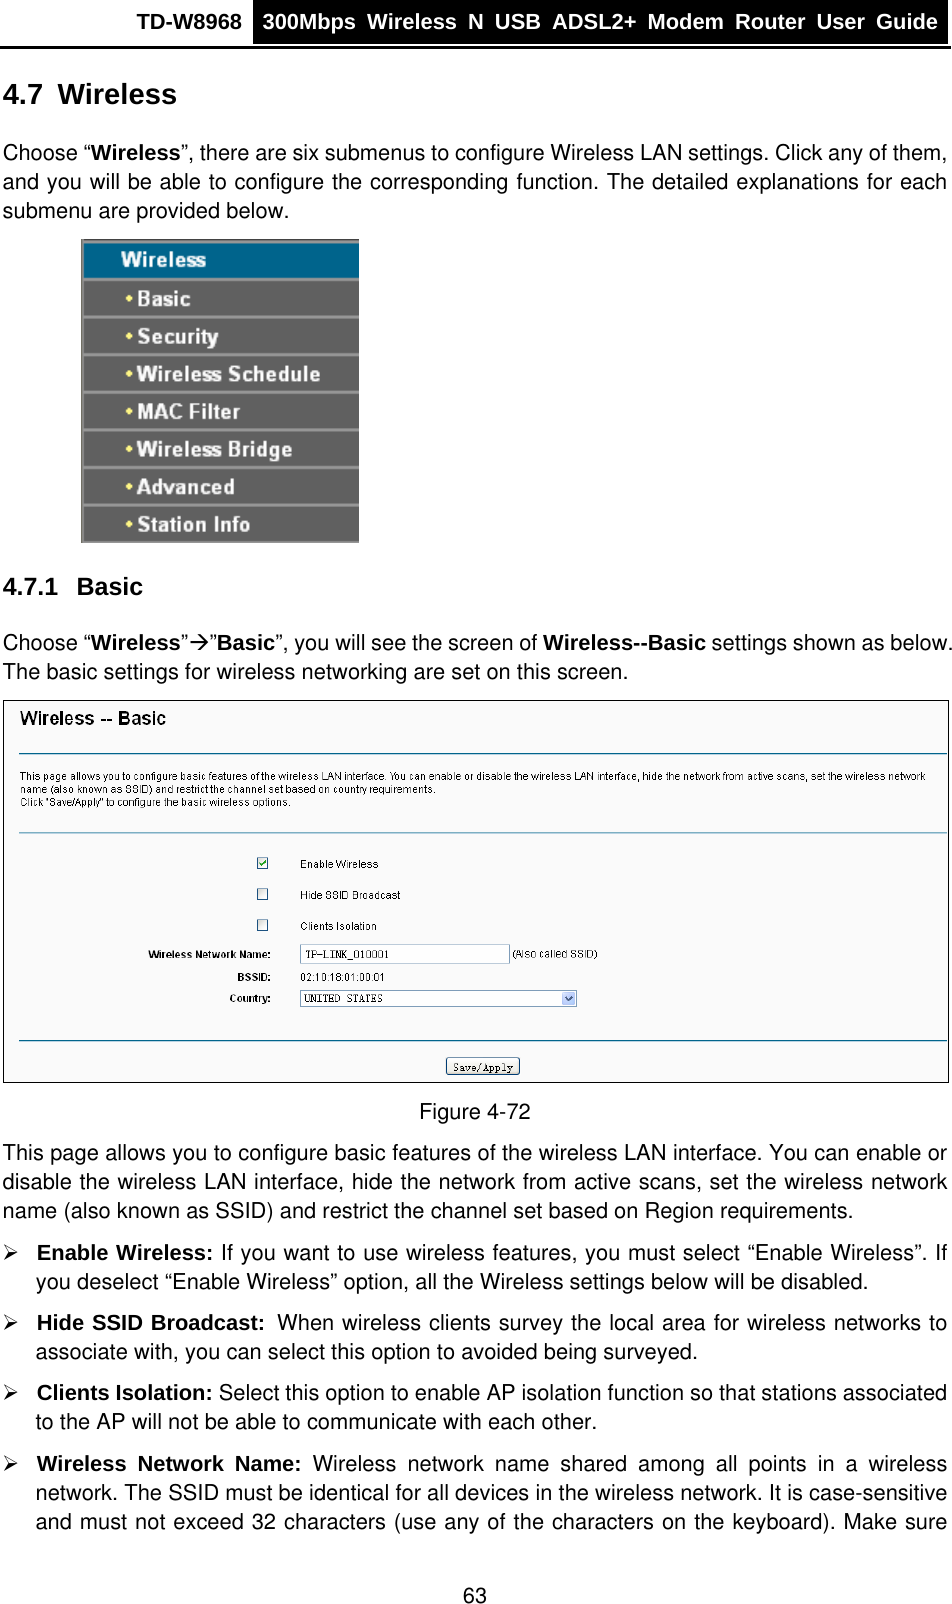 TD-W8968  300Mbps Wireless N USB ADSL2+ Modem Router User Guide  4.7  Wireless Choose “Wireless”, there are six submenus to configure Wireless LAN settings. Click any of them, and you will be able to configure the corresponding function. The detailed explanations for each submenu are provided below.  4.7.1  Basic Choose “Wireless”Æ”Basic”, you will see the screen of Wireless--Basic settings shown as below. The basic settings for wireless networking are set on this screen.  Figure 4-72 This page allows you to configure basic features of the wireless LAN interface. You can enable or disable the wireless LAN interface, hide the network from active scans, set the wireless network name (also known as SSID) and restrict the channel set based on Region requirements. ¾ Enable Wireless: If you want to use wireless features, you must select “Enable Wireless”. If you deselect “Enable Wireless” option, all the Wireless settings below will be disabled. ¾ Hide SSID Broadcast: When wireless clients survey the local area for wireless networks to associate with, you can select this option to avoided being surveyed. ¾ Clients Isolation: Select this option to enable AP isolation function so that stations associated to the AP will not be able to communicate with each other. ¾ Wireless Network Name: Wireless network name shared among all points in a wireless network. The SSID must be identical for all devices in the wireless network. It is case-sensitive and must not exceed 32 characters (use any of the characters on the keyboard). Make sure 63 